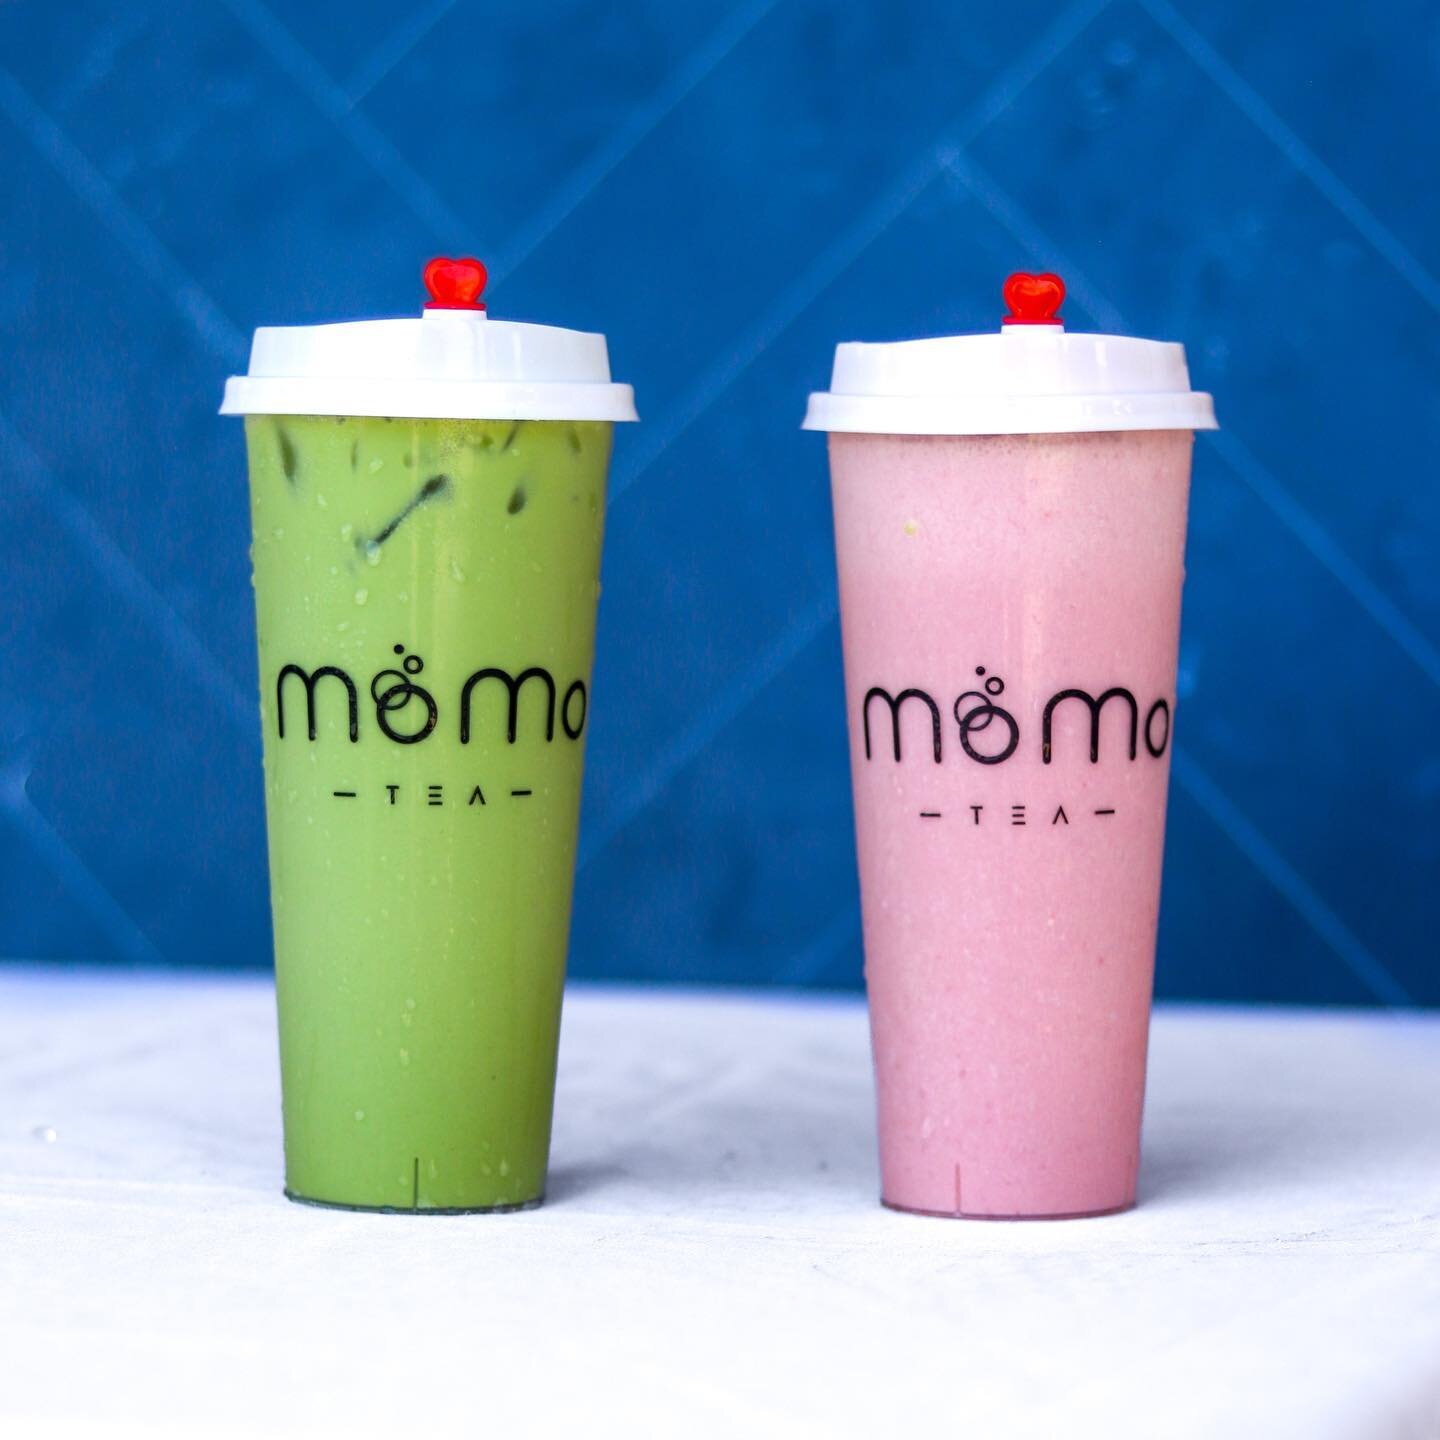 Rich matcha latte 🍵💚 or refreshing fruit smoothie? 🍓🥤

Open 11-7PM daily; we are closed on Tuesday&rsquo;s.
&bull;
&bull;
&bull;
&bull;
#momotea #momoteabr #batonrougefoodies #rosematchalatte #matchalovers  #batonrouge #milktealatte #matchamilkte